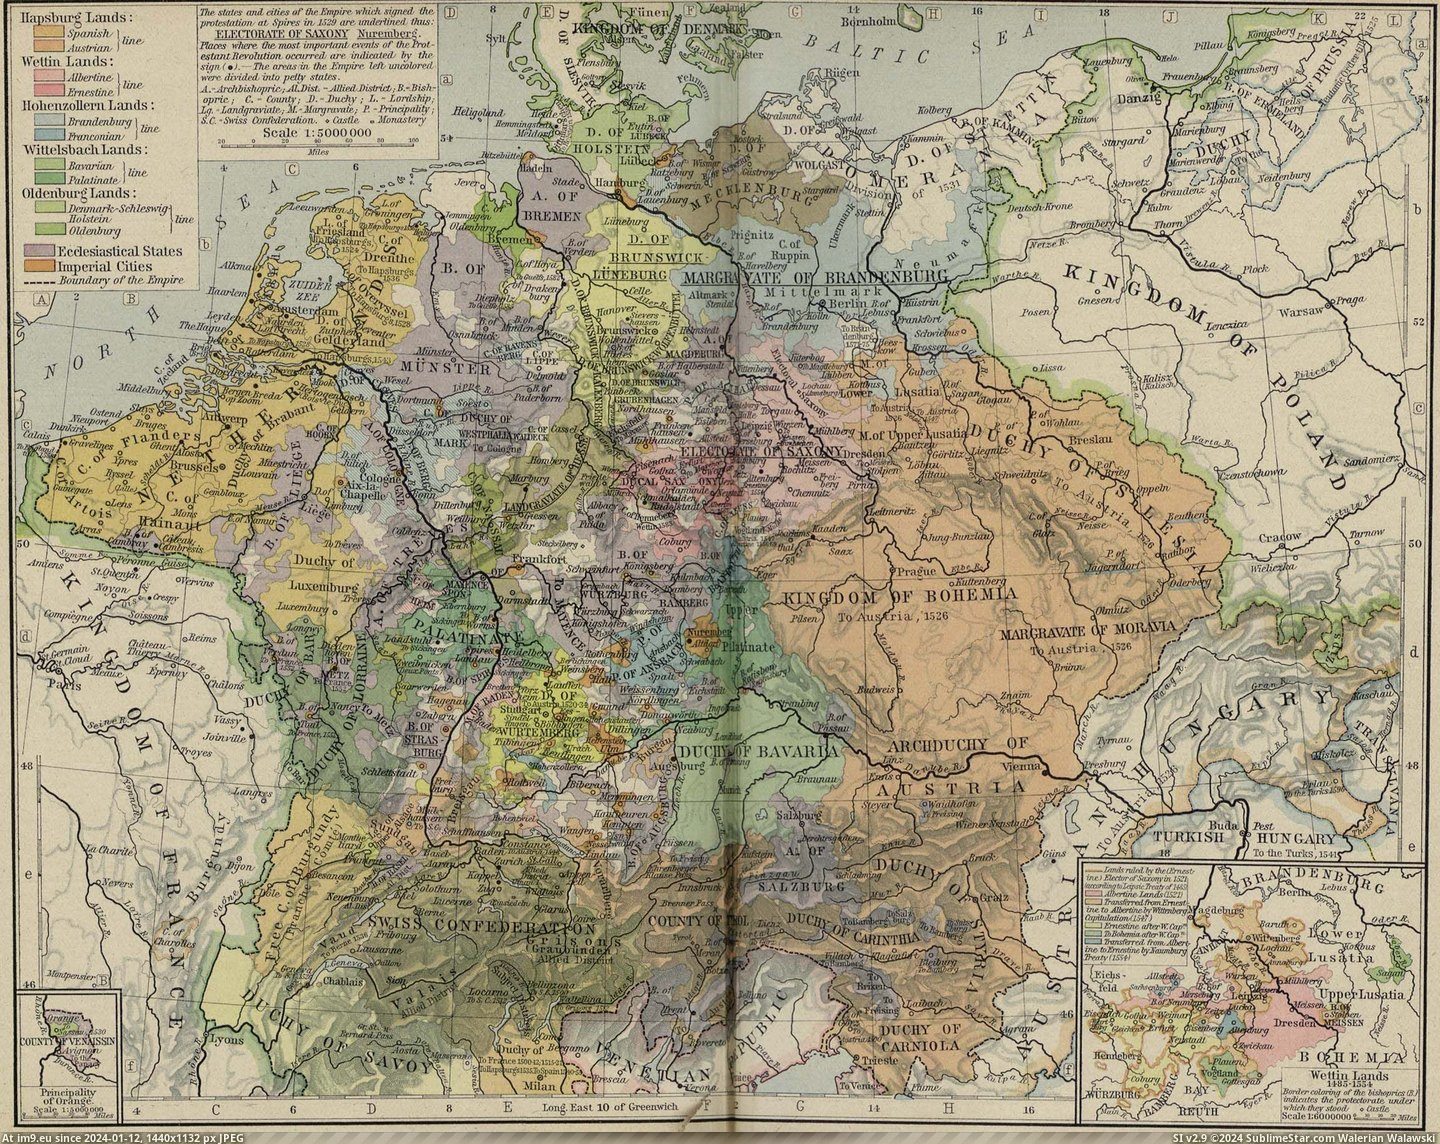 #Key #Holy #Empire #Protestant #Protestation #Reformation #Speyer #Roman #Locations #Highlighting [Mapporn] Holy Roman Empire c. 1547, highlighting the Protestation at Speyer and key locations of Protestant Reformation [2307×1 Pic. (Image of album My r/MAPS favs))